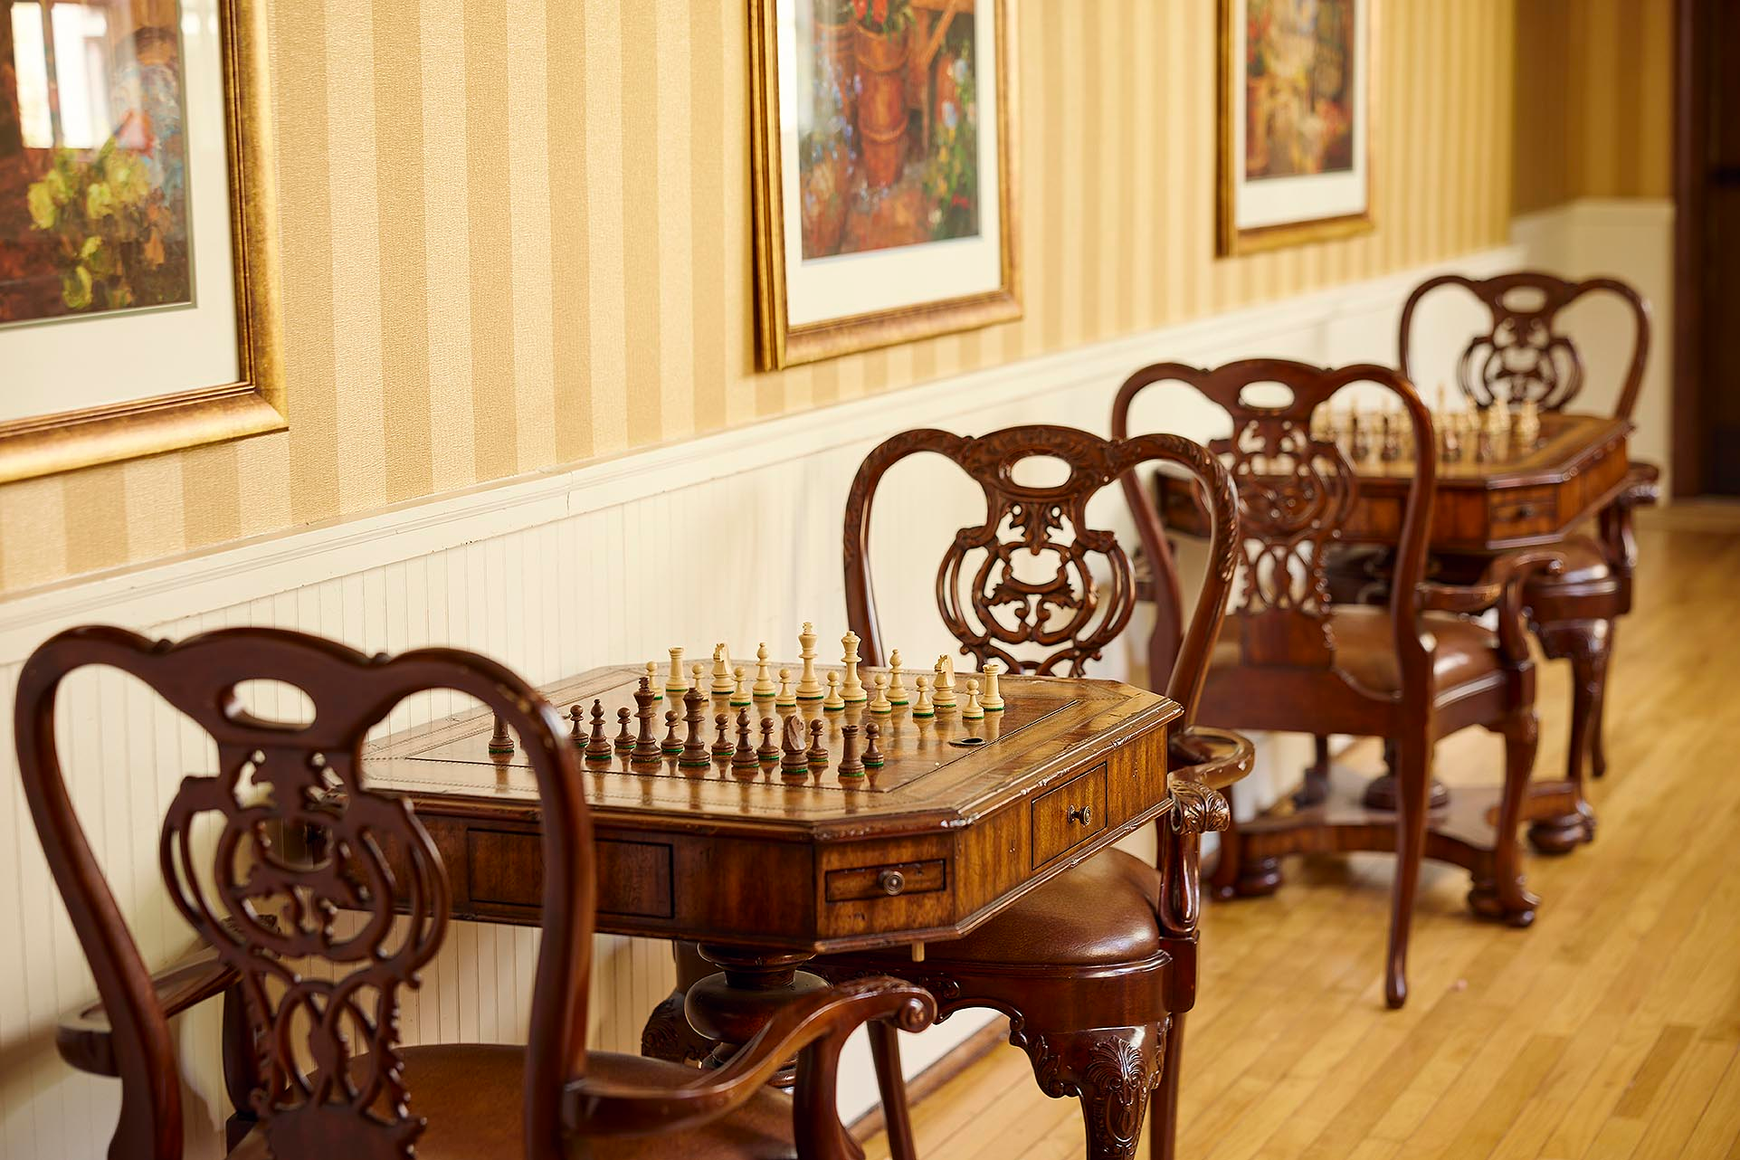 Chessboards await in the game room